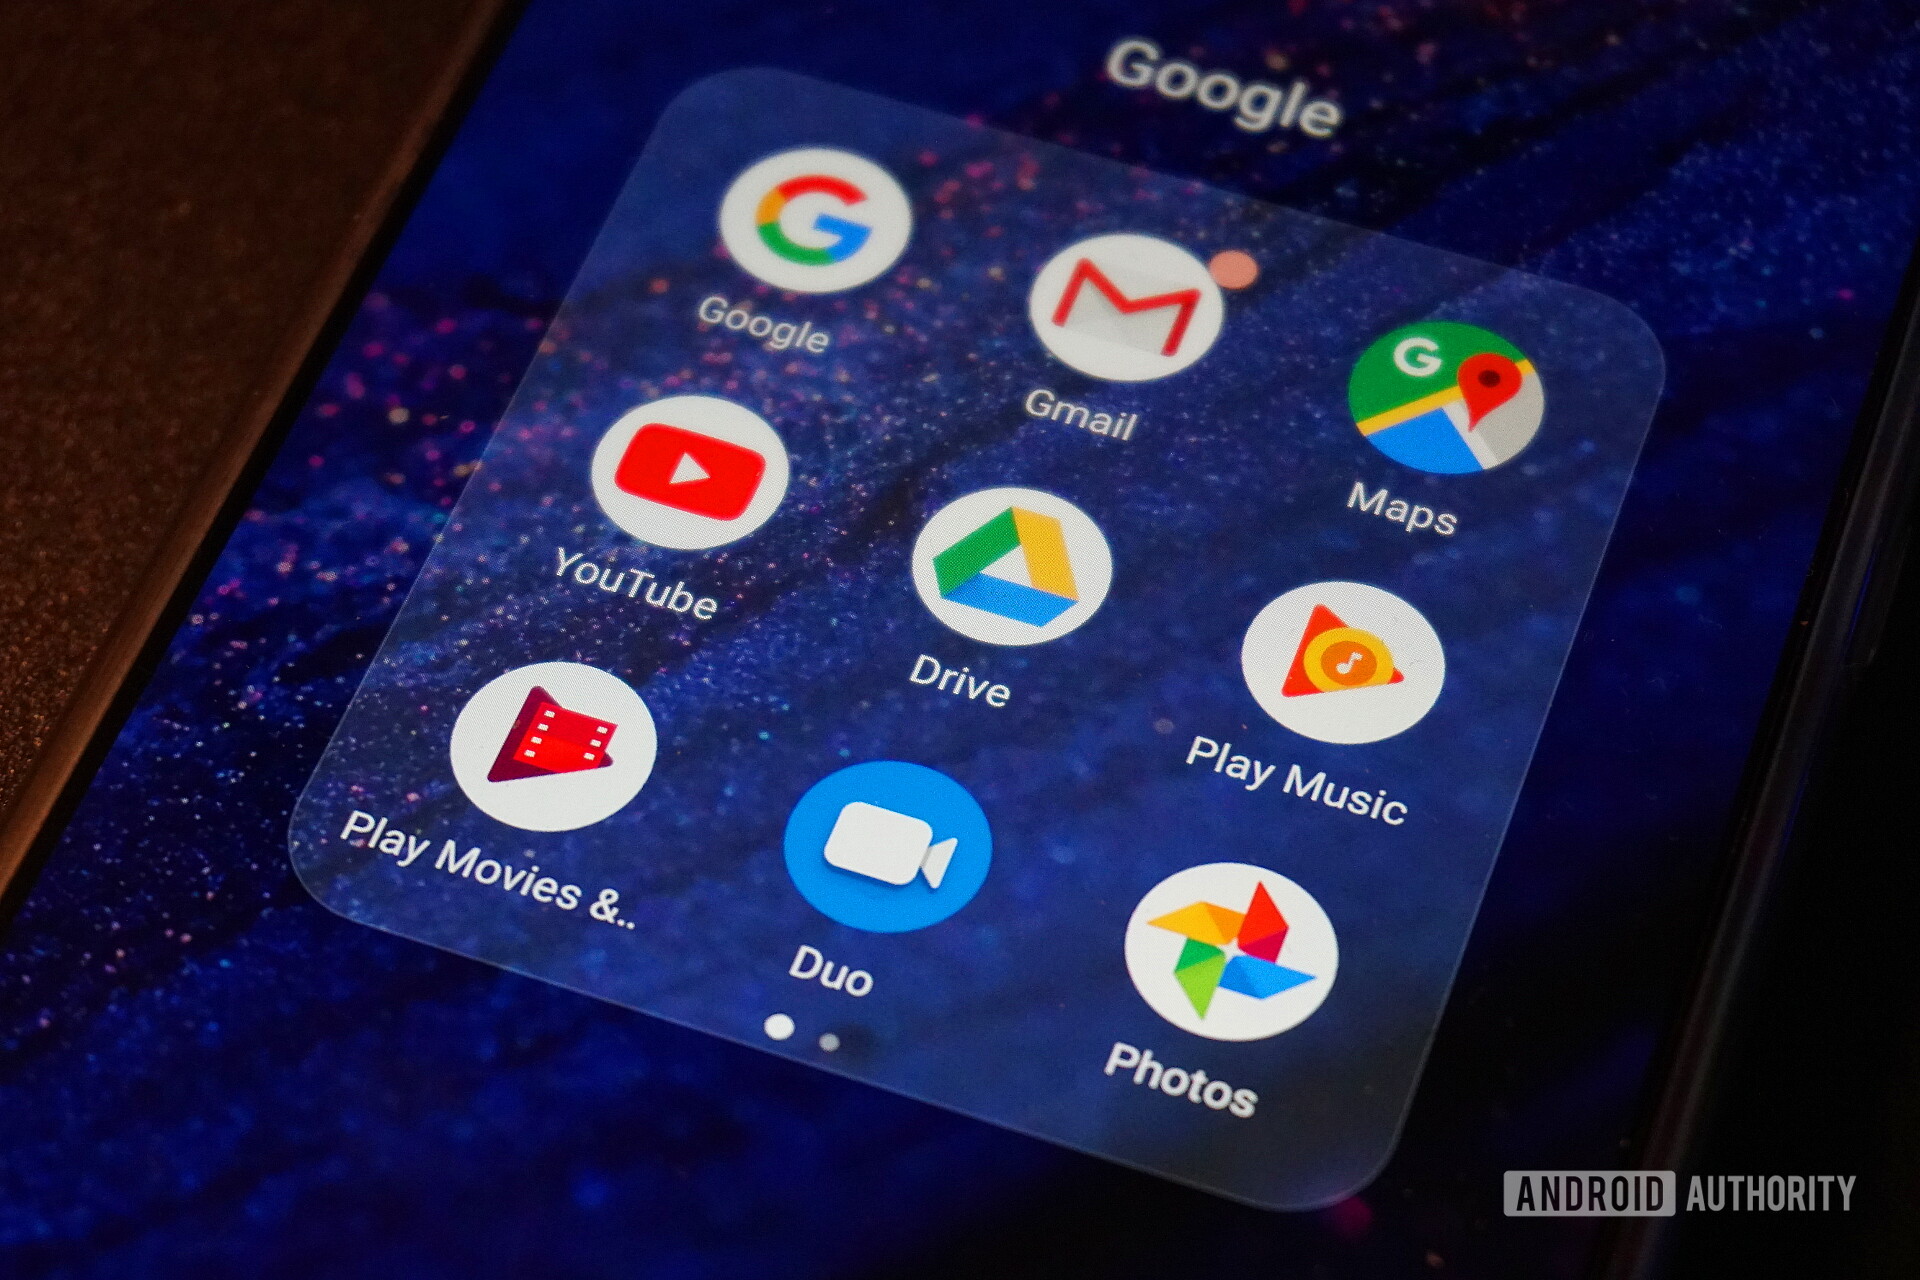 Google app icons on a smartphone display